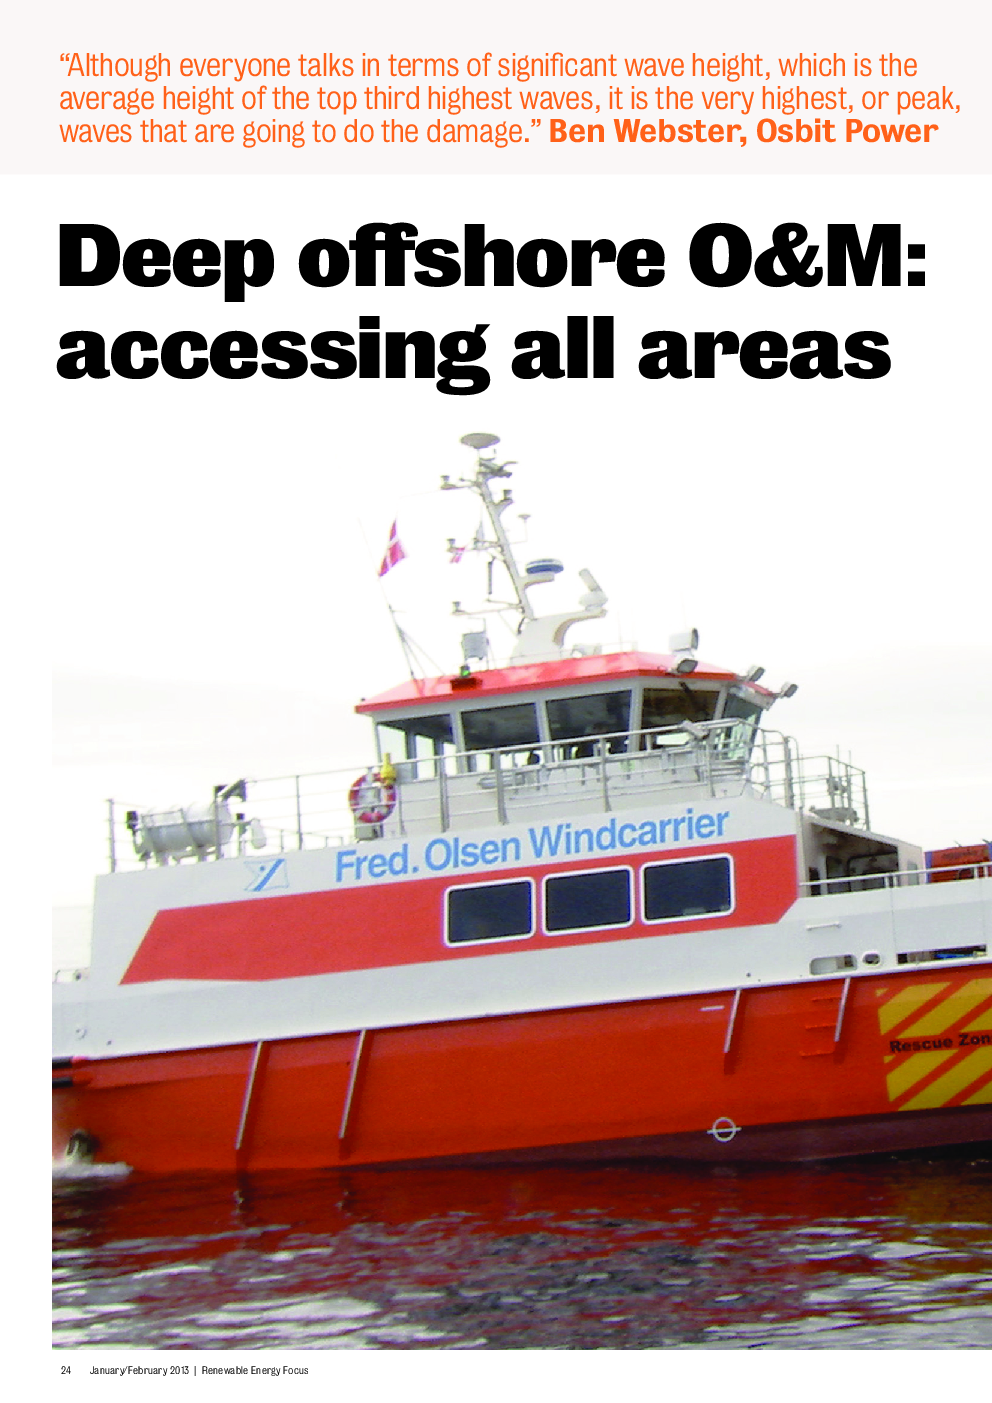 Deep offshore O&M: accessing all areas